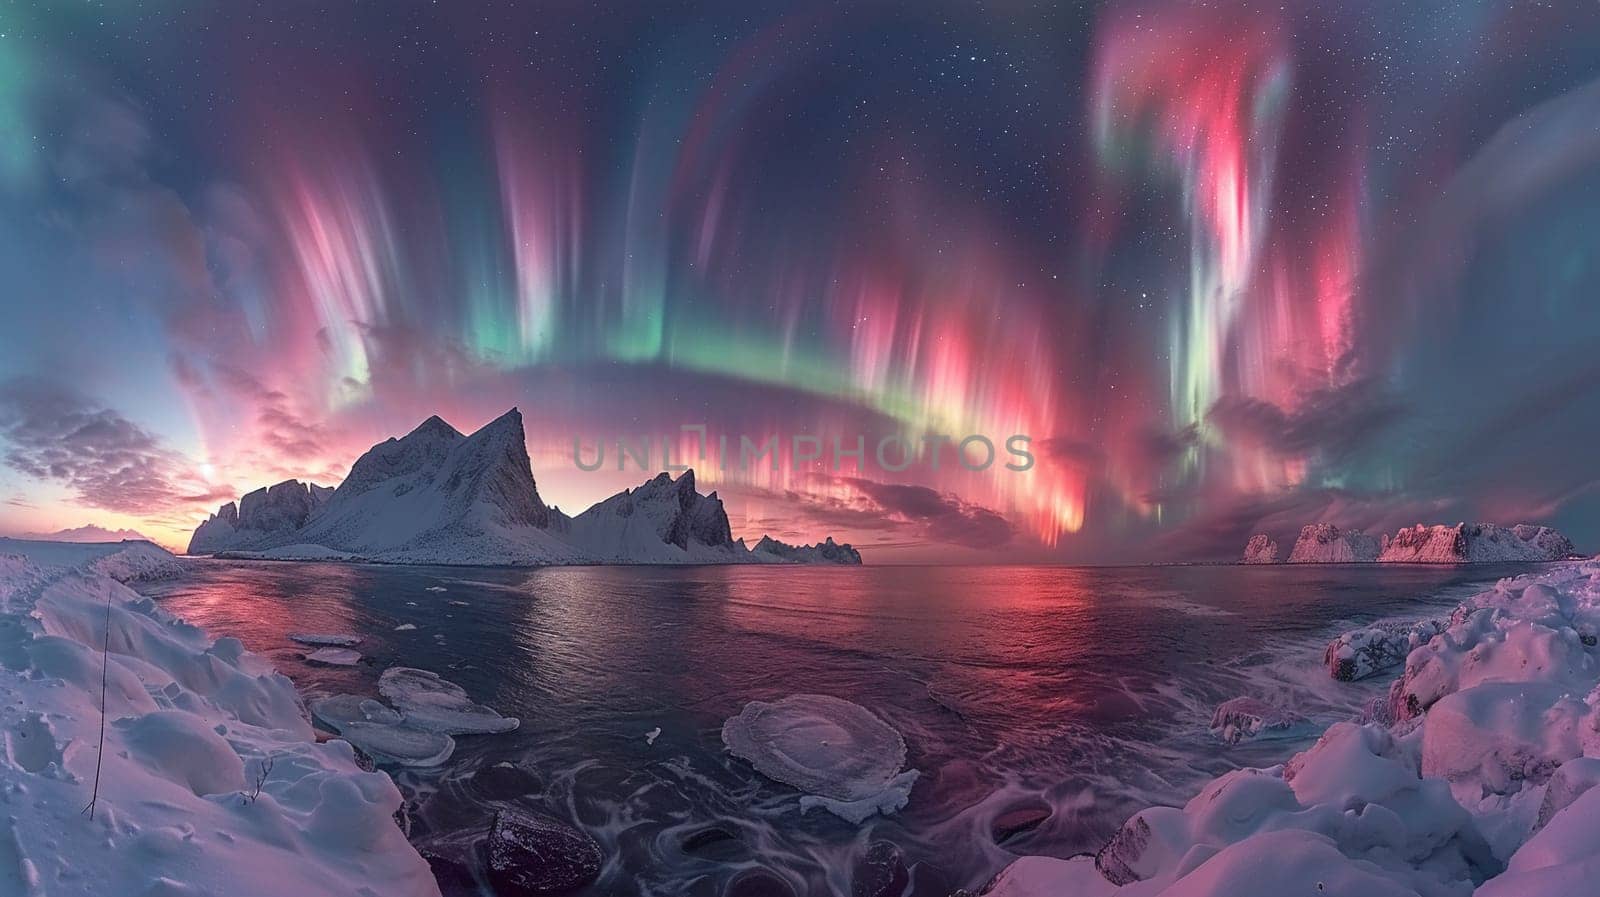 The eternal dance of the Northern Lights, nature's masterpiece